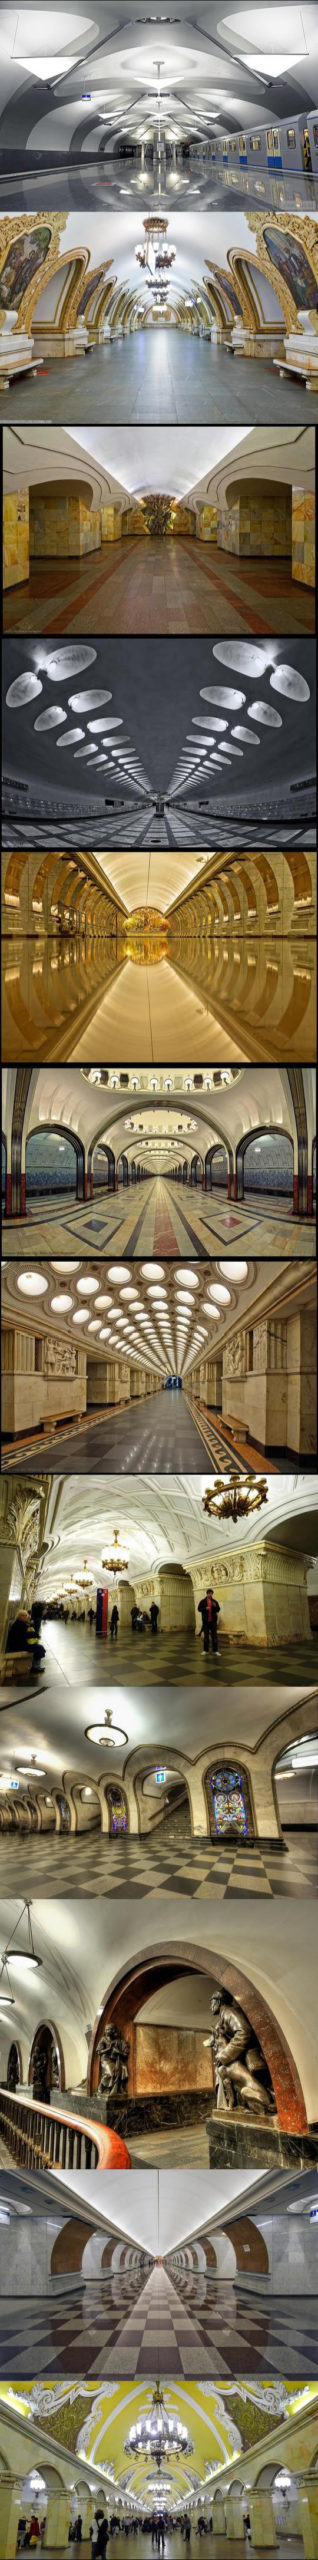 Moscow+Metro+Stations+Are+Magnificent